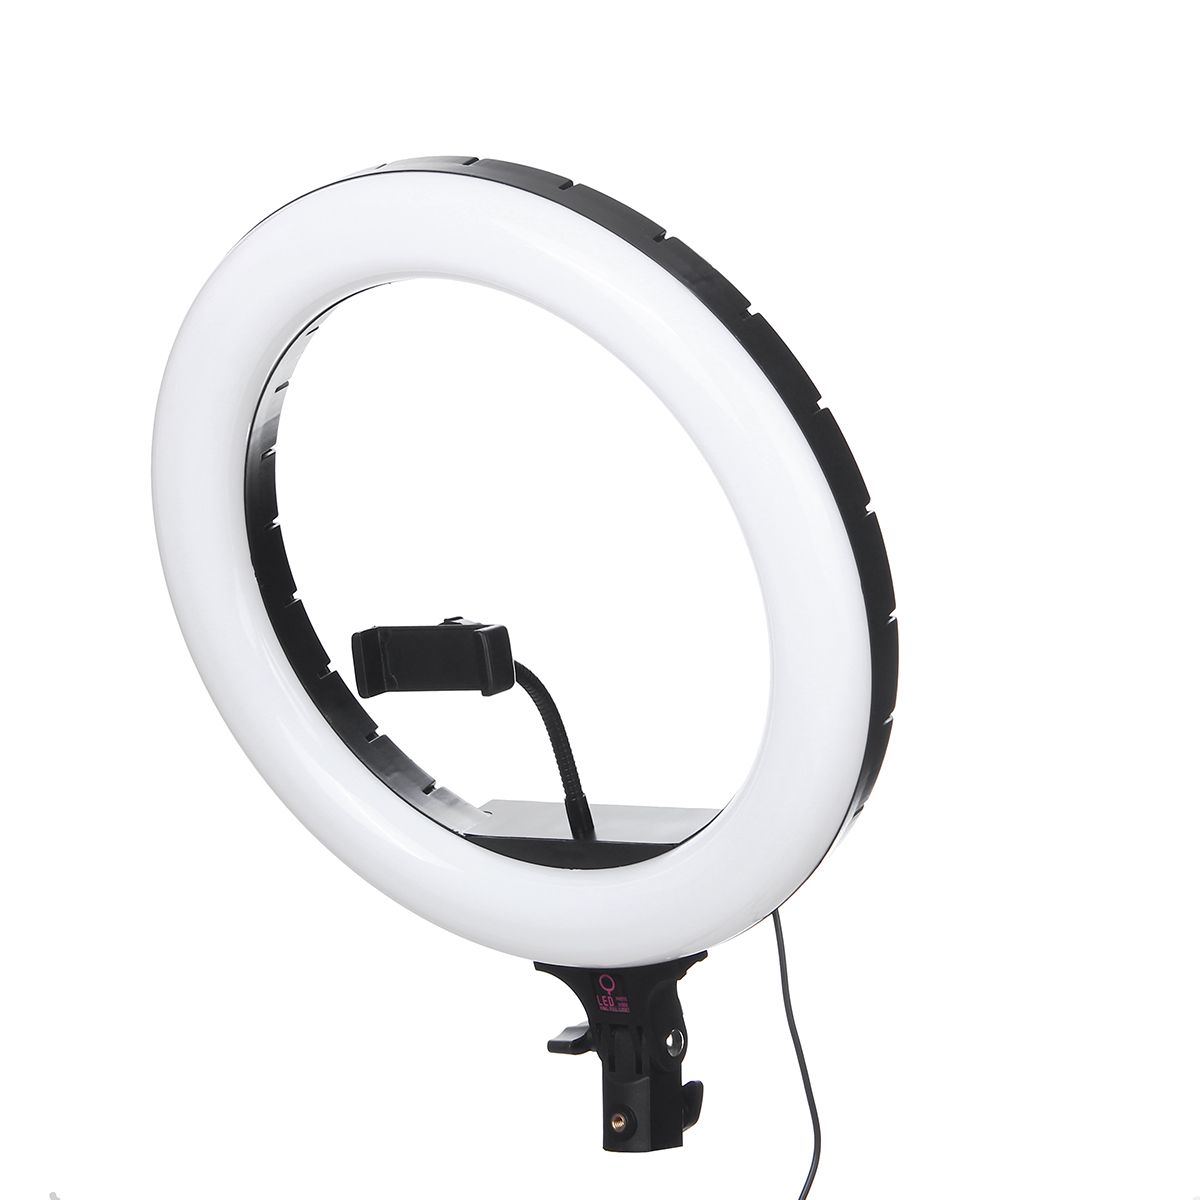 710131518-Inch-LED-Ring-Light-Studio-Fill-Light-Tripod-Stand-Photo-Makeup-Live-Dimmable-Lamp-for-You-1708205